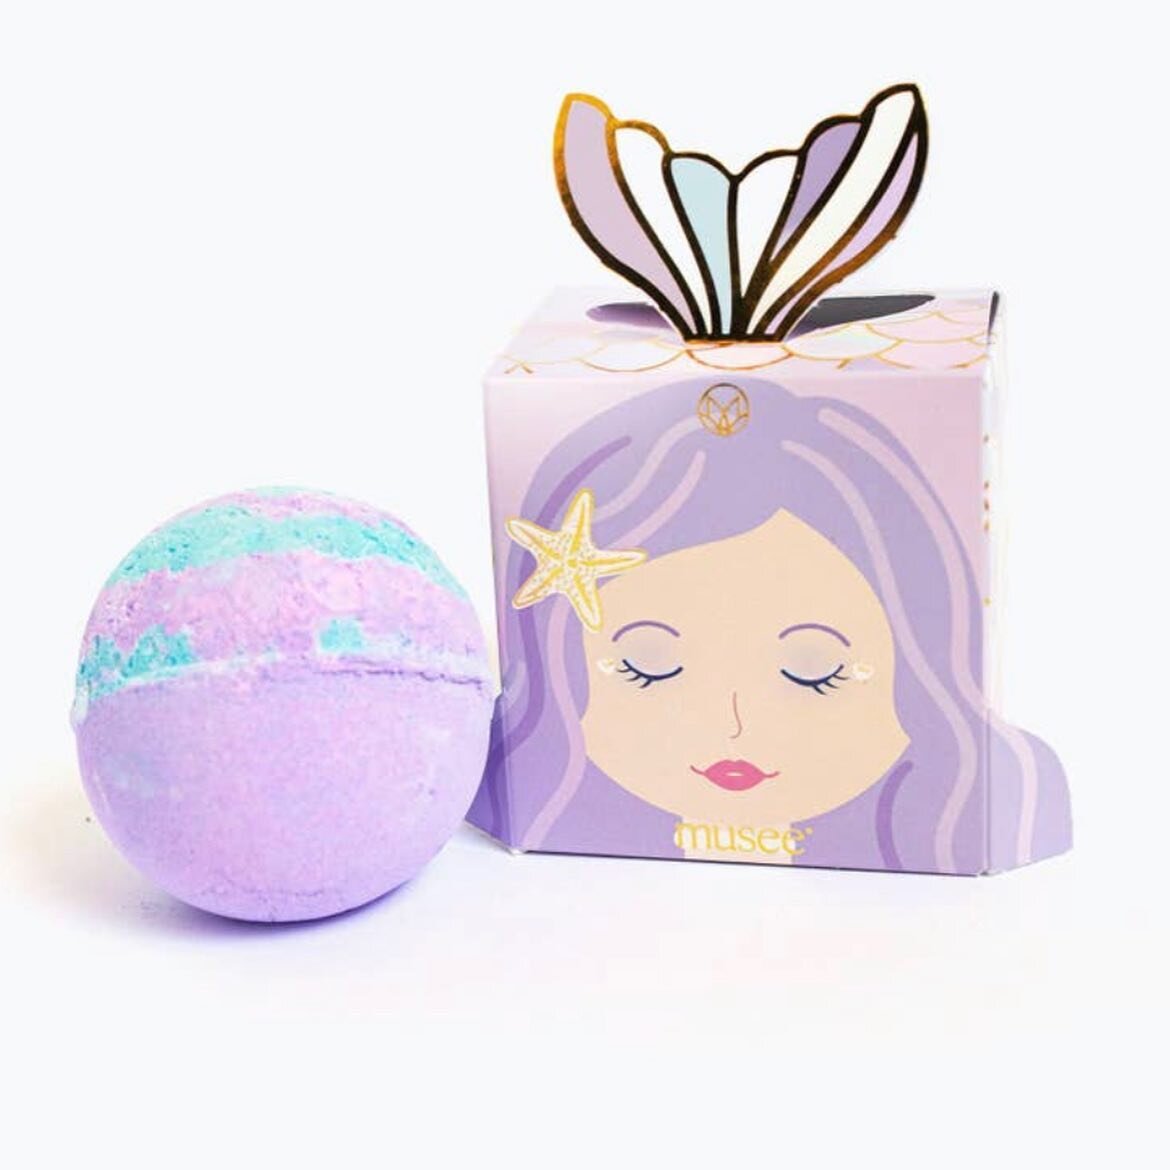 The perfect🎁! Our NEW bath and body products.. Each comes uniquely packaged, is available in an amazing scent, and handmade in the USA. #gift #handmadegifts #giftideas #giftsforher #bathandbodyworks #bathandbody #relax #bathbomb #bathbombs #mermaid 